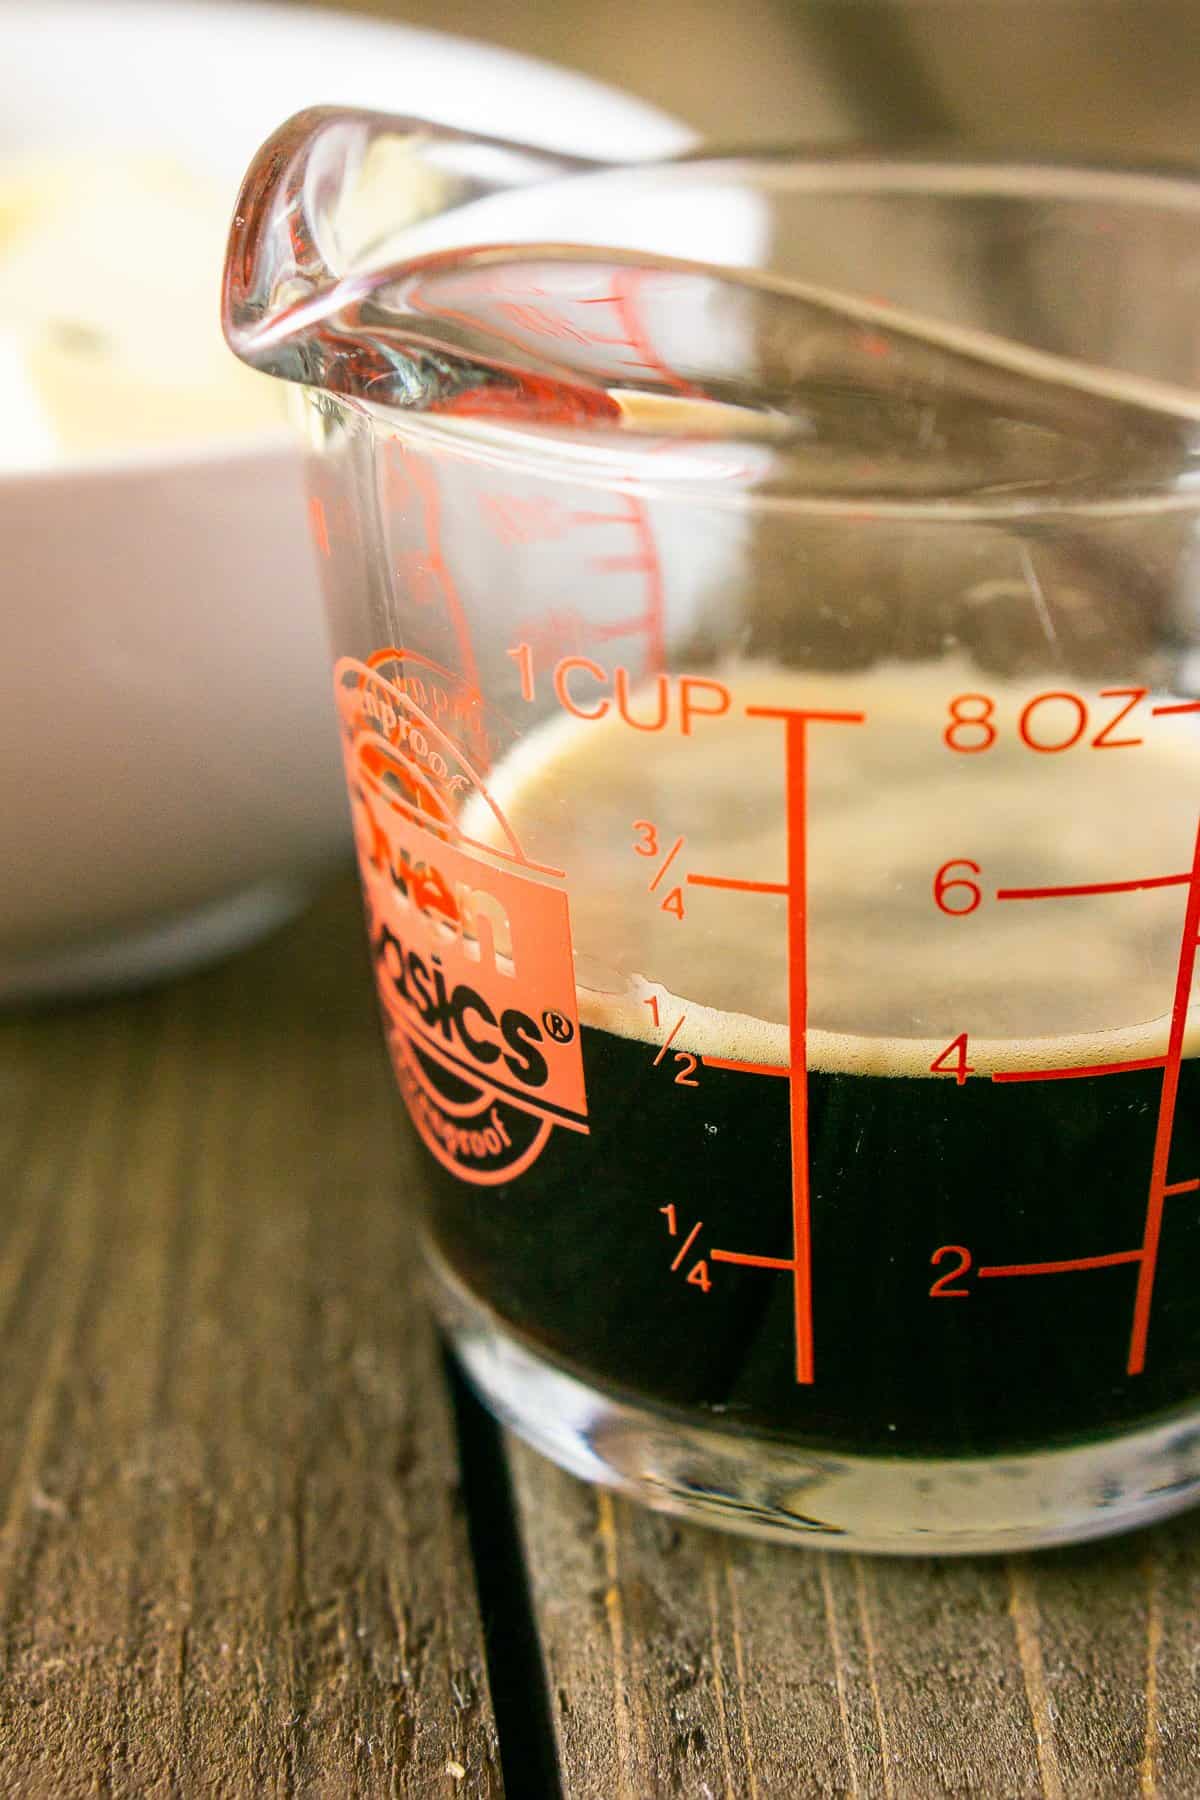 A measuring cup of beer ready to use for the brownie batter.